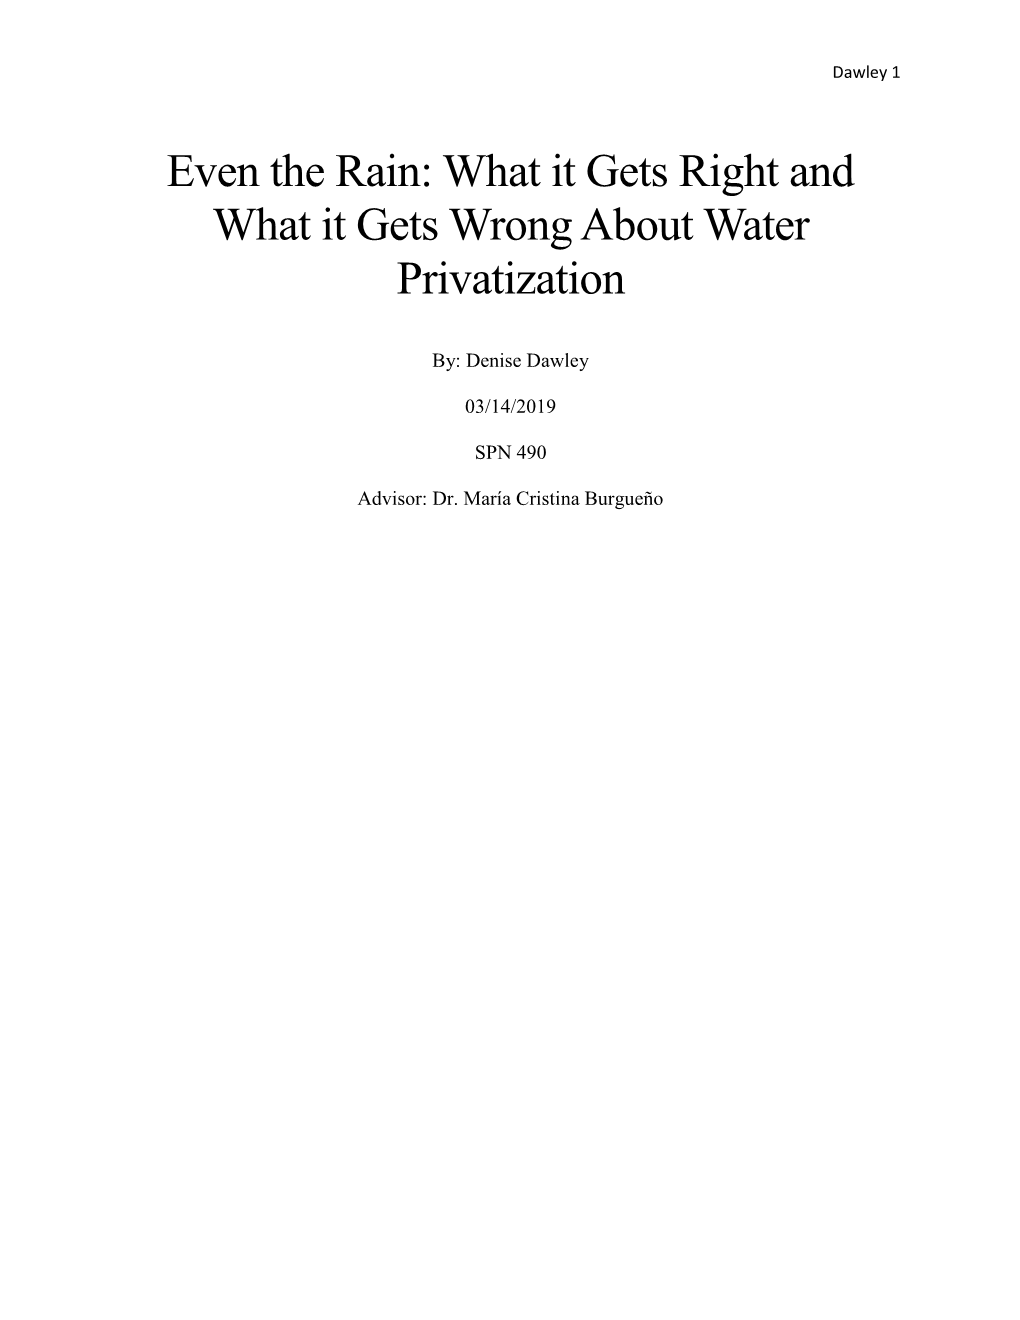 Even the Rain: What It Gets Right and What It Gets Wrong About Water Privatization